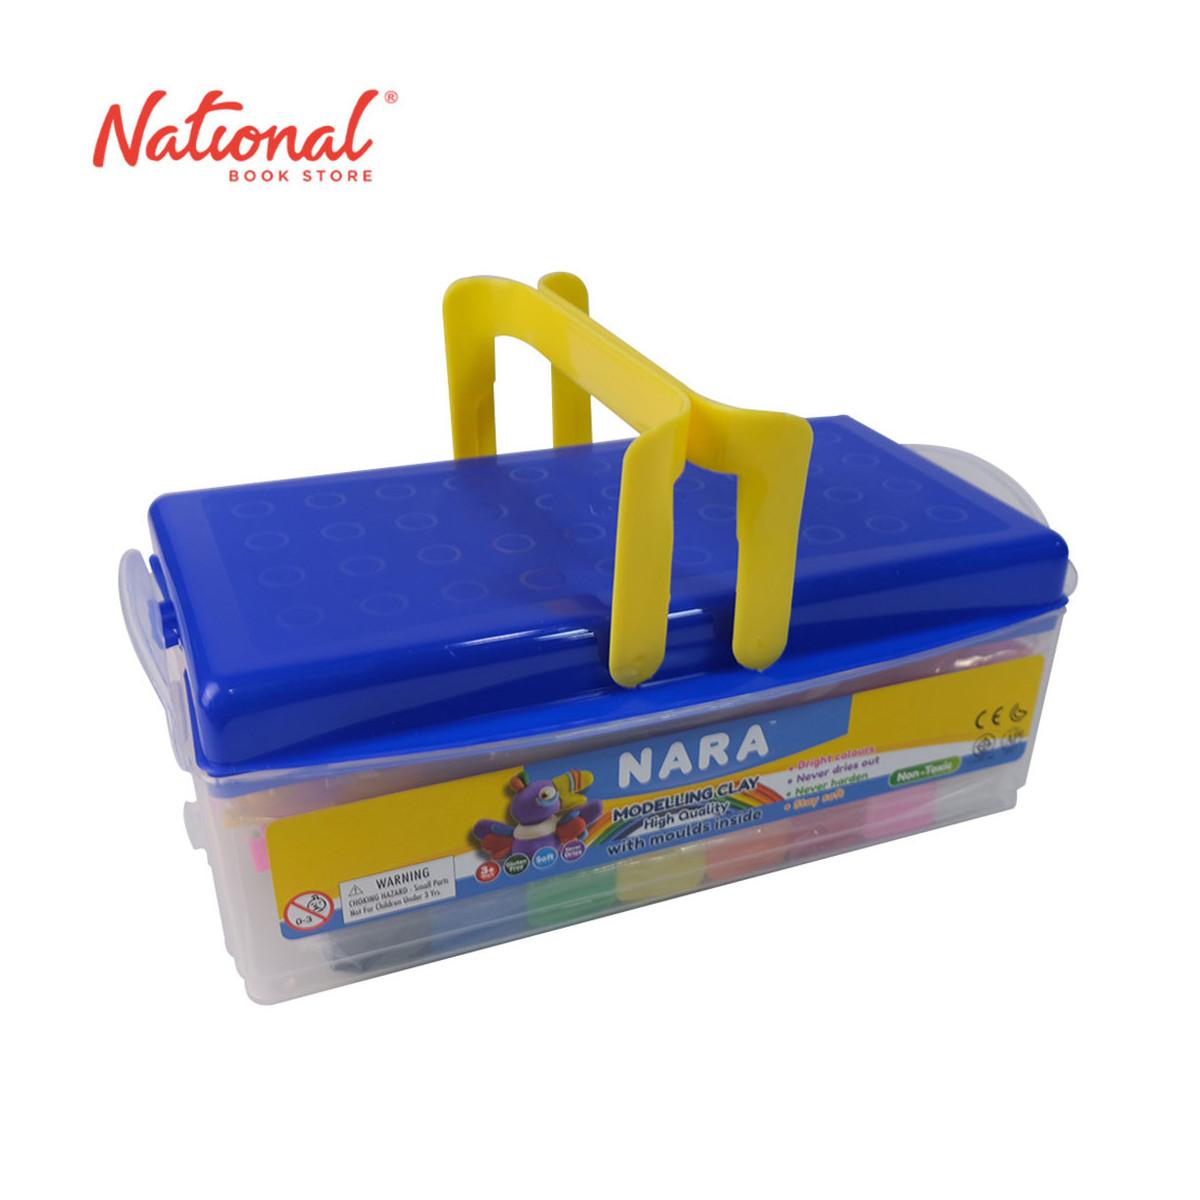 Nara Modelling Clay 03027870 8 Colors with Tools in Plastic Box